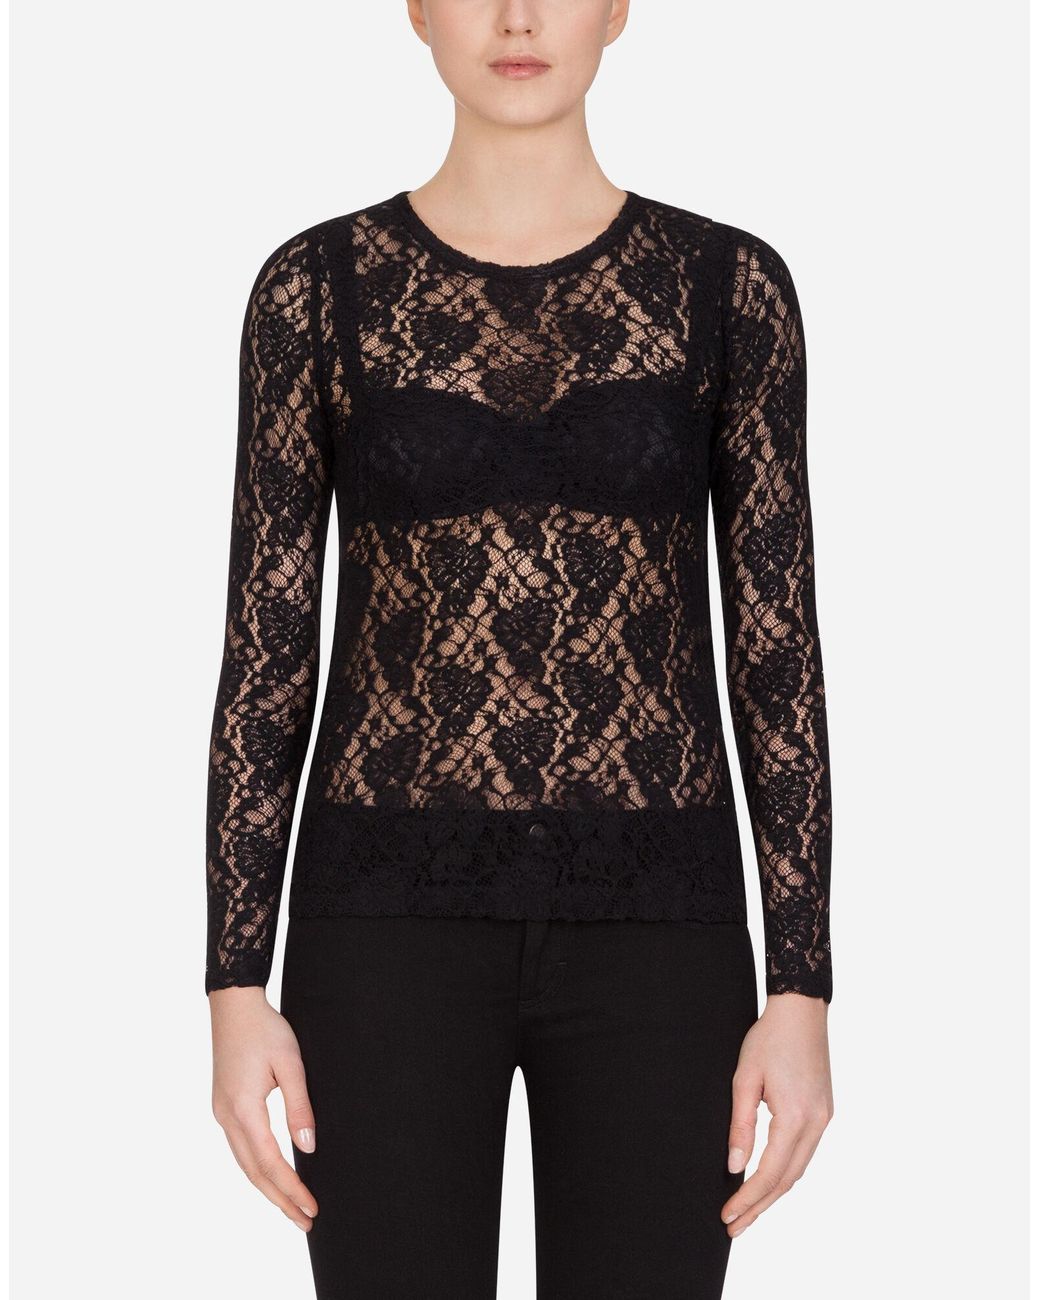 Dolce & Gabbana Lace Top in Black - Save 40% - Lyst